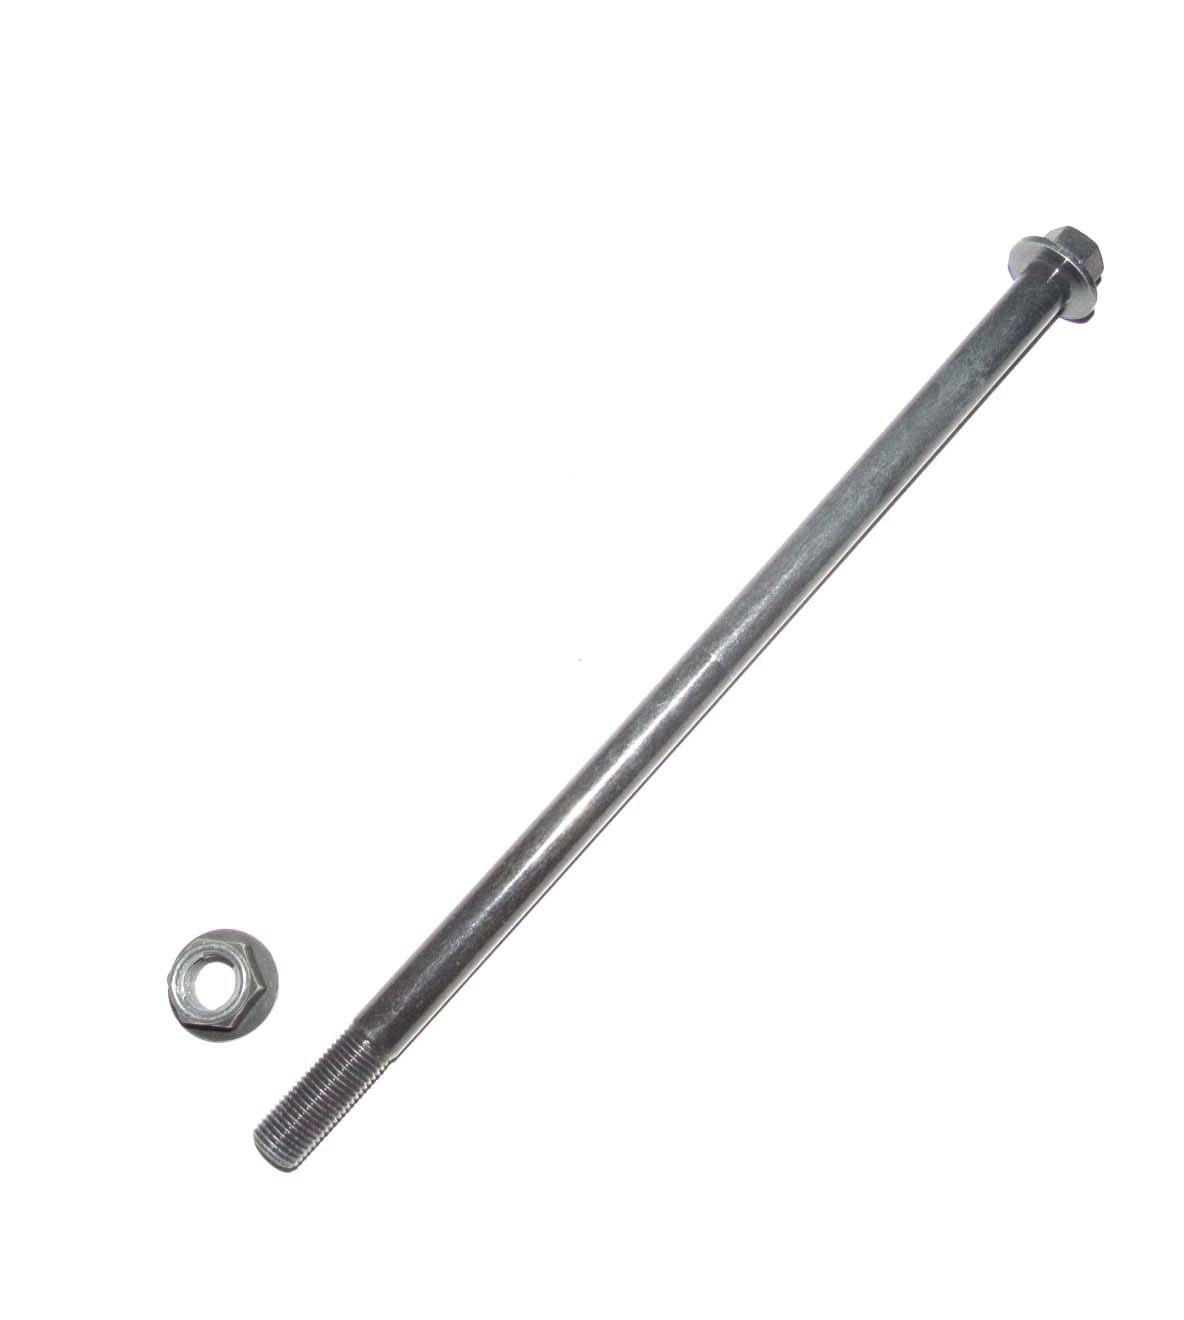 12mm Front Scooter Axle Bolt (M12x250) Fits many 49-250cc Scooters.